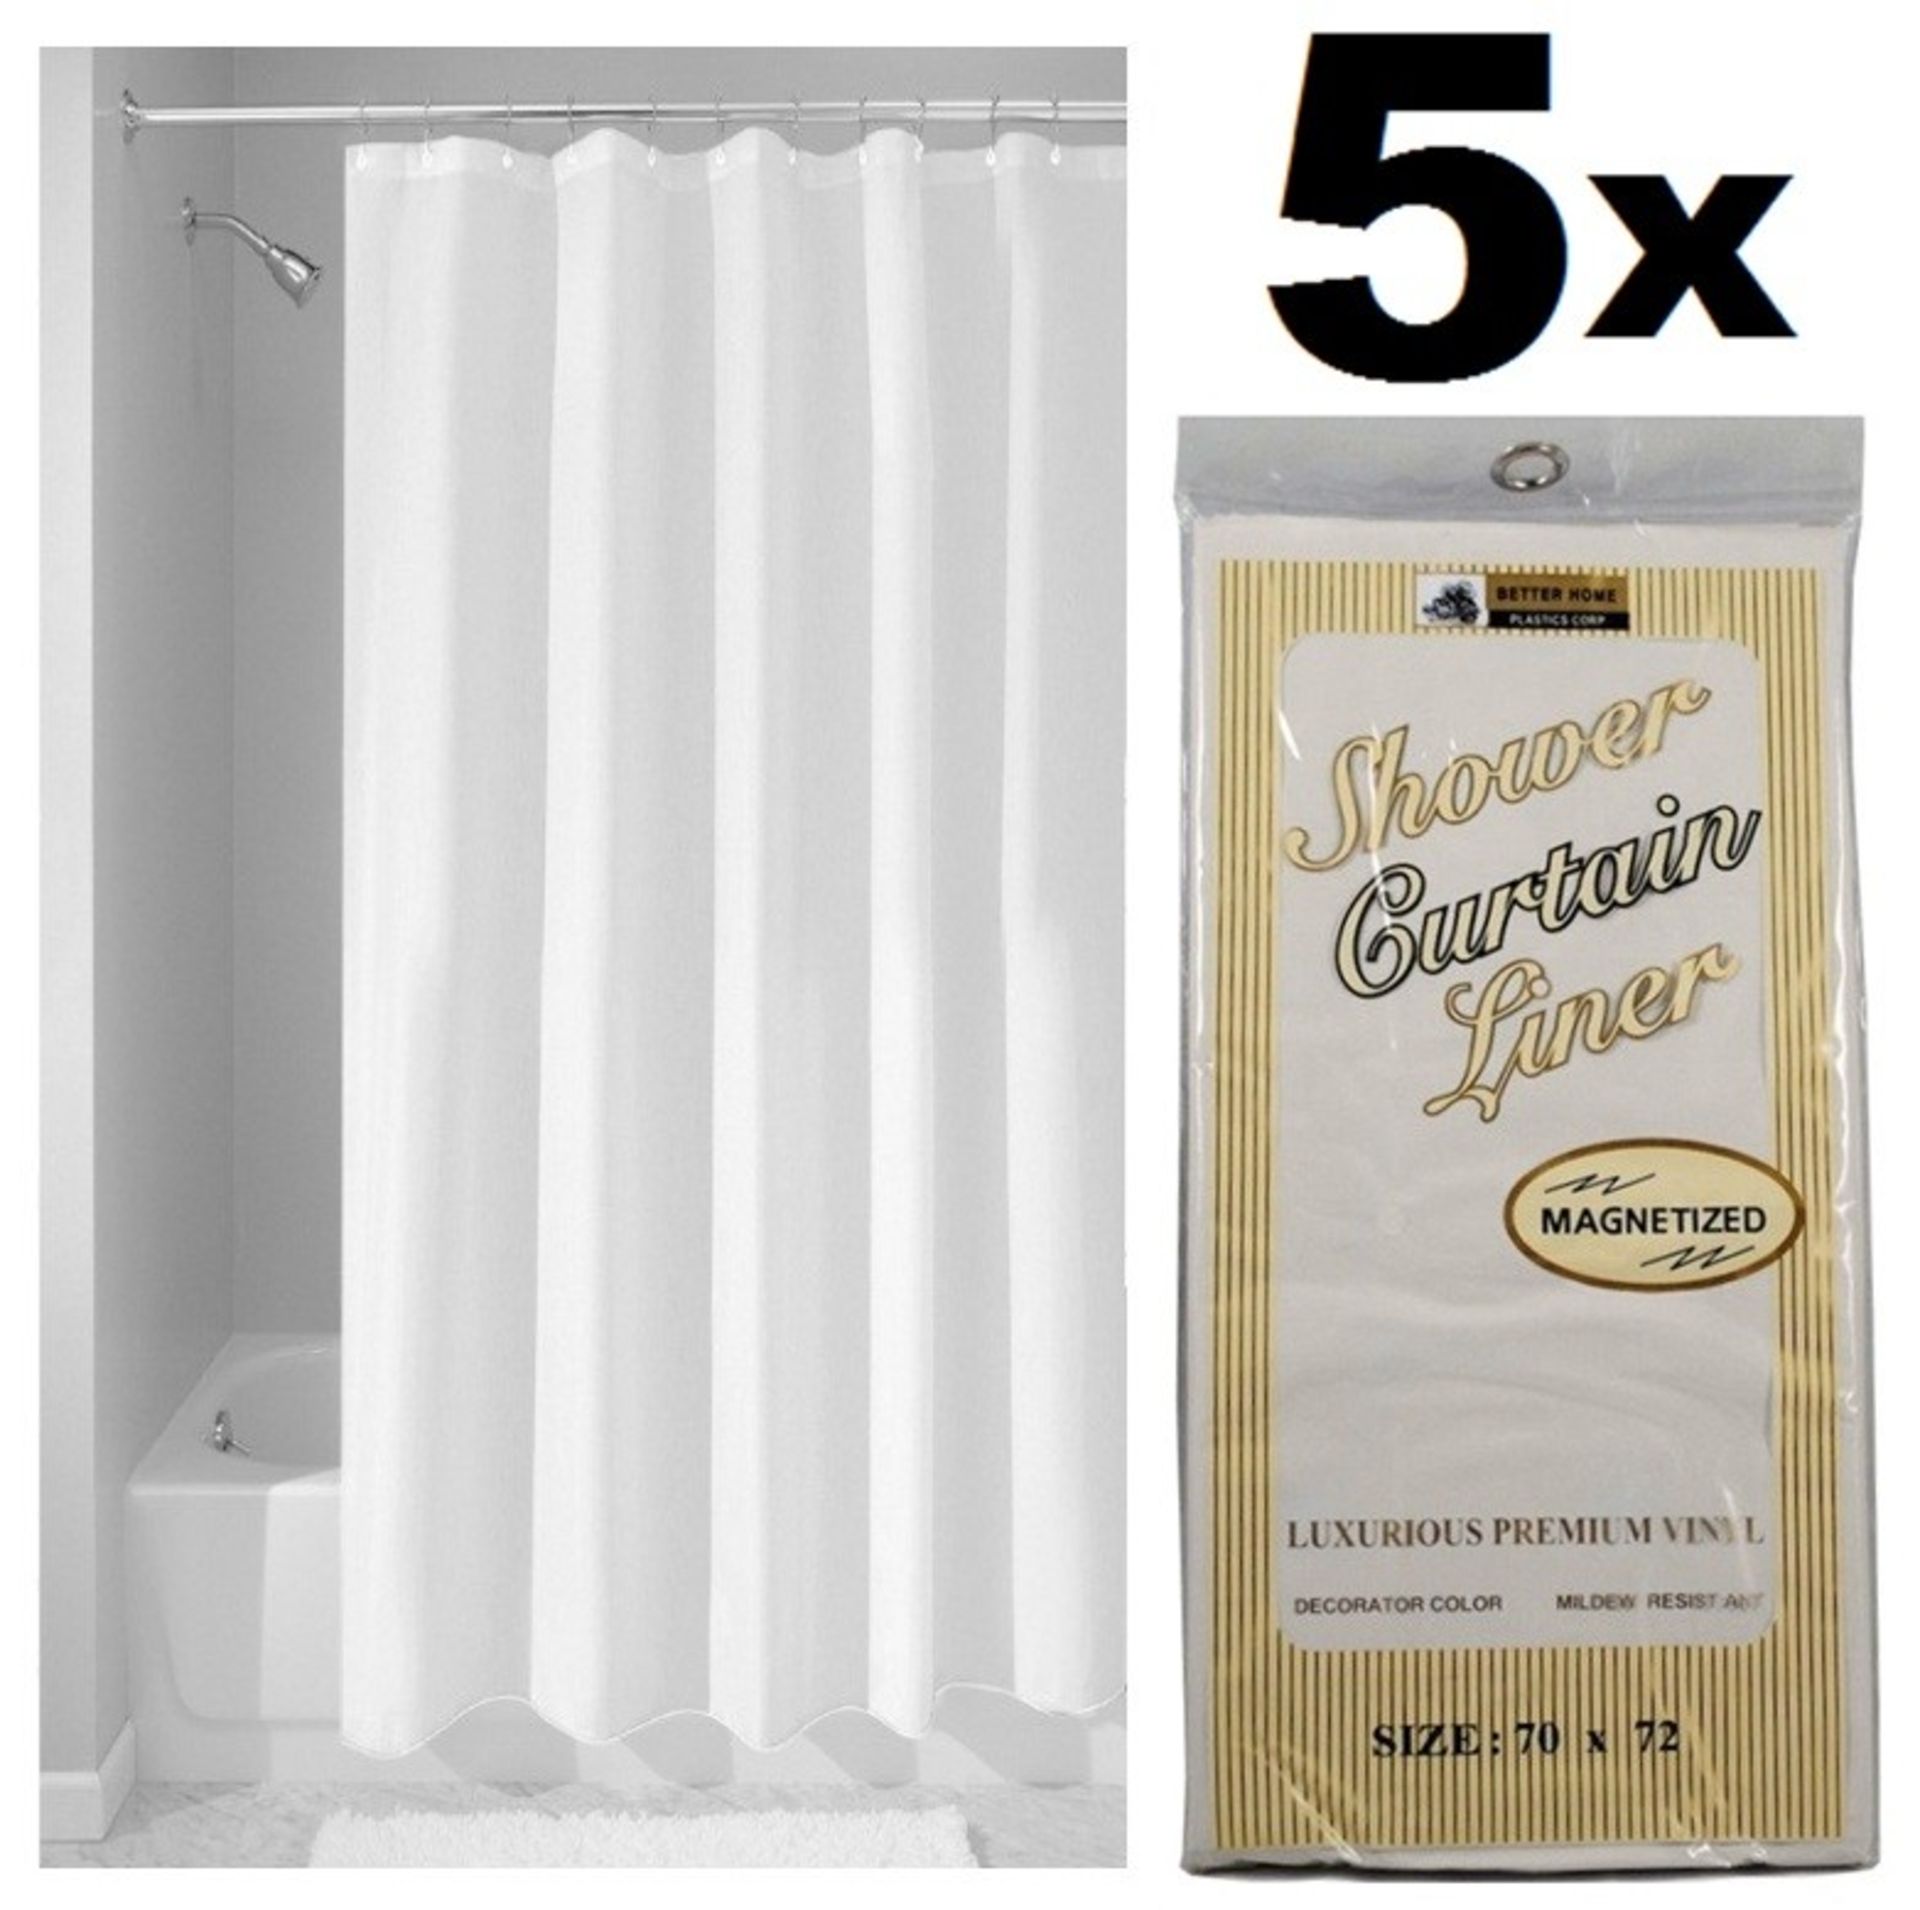 Lot to Contain 5 SHOWER CURTAIN LINER weighted Kee